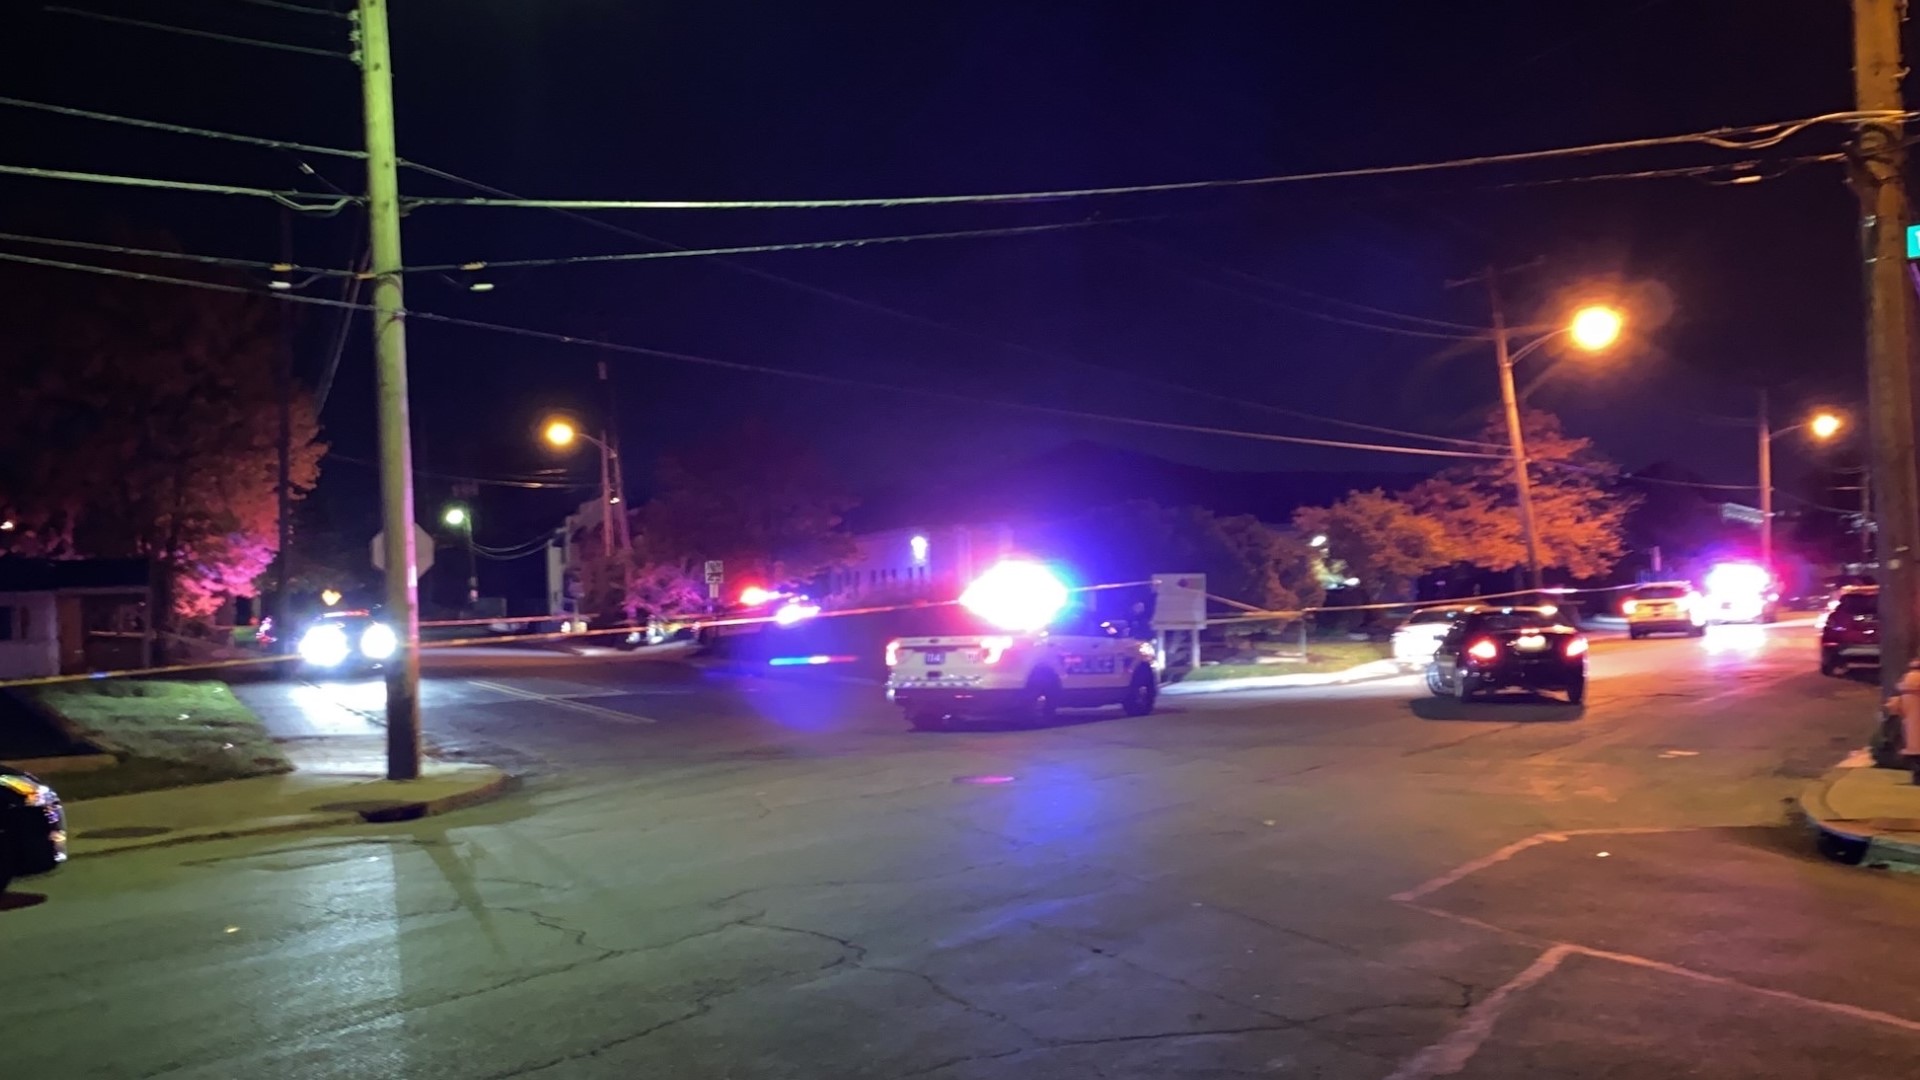 The shooting happened on the 1600 block of Patton Avenue just before 11:40 p.m.